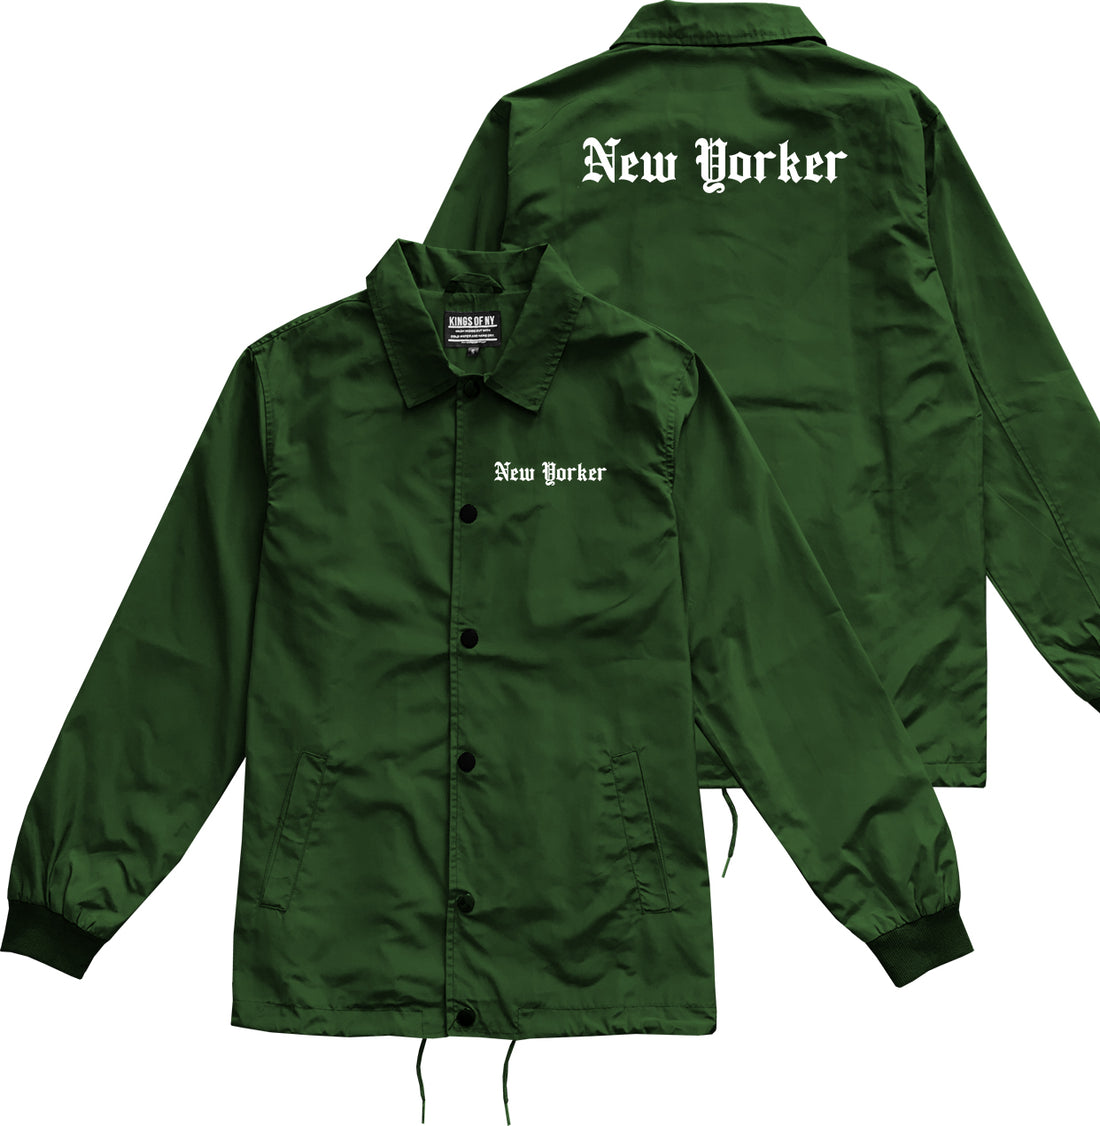 New Yorker Old English Mens Coaches Jacket Green by Kings Of NY